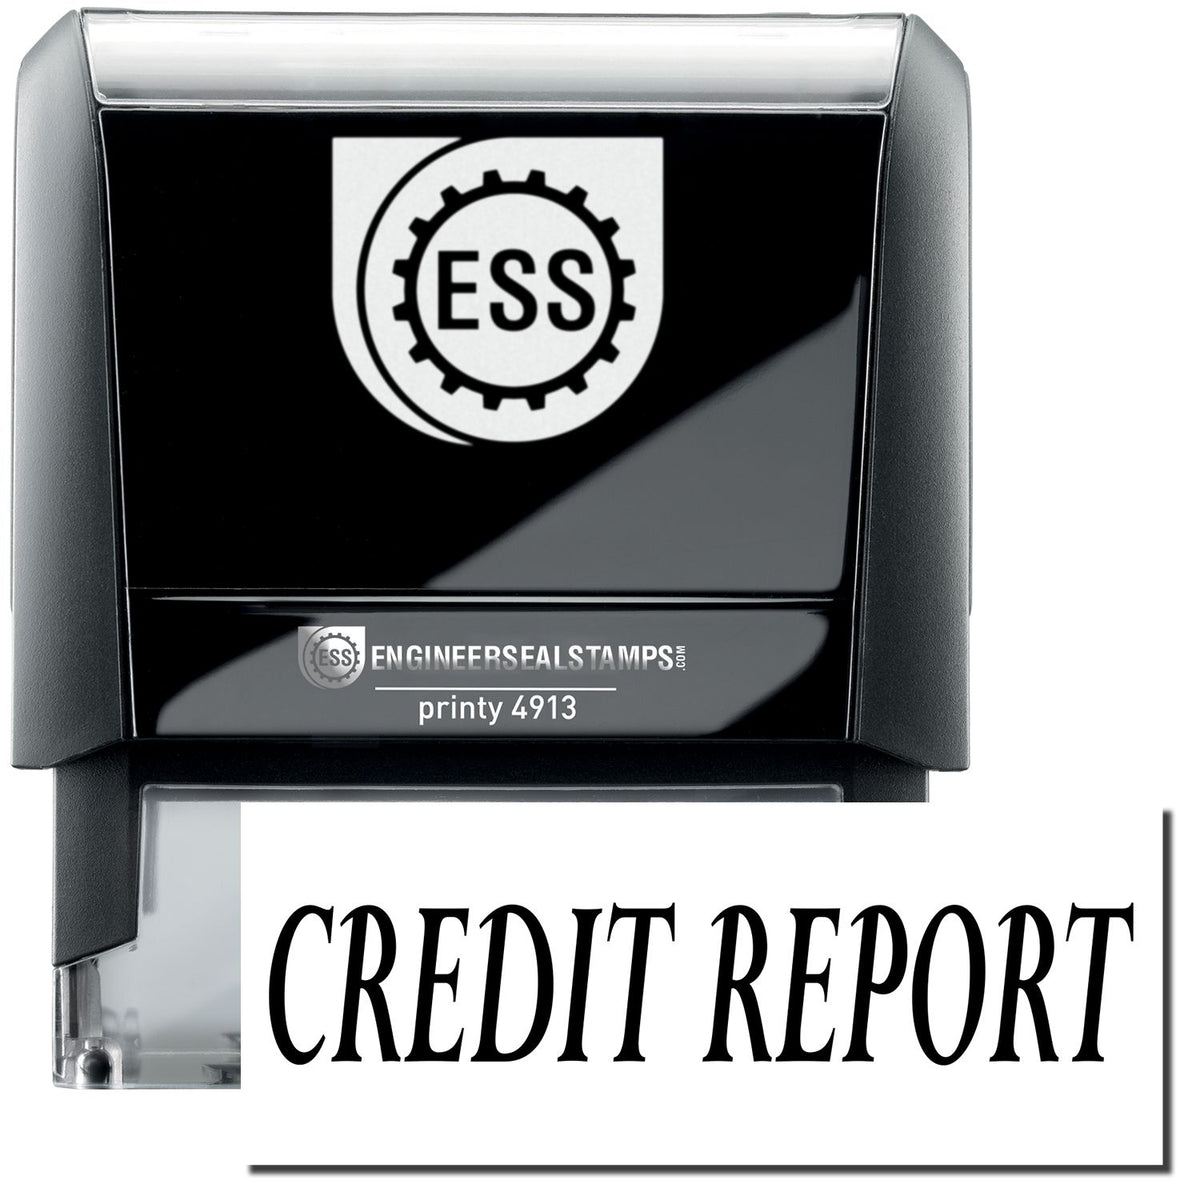 A self-inking stamp with a stamped image showing how the text &quot;CREDIT REPORT&quot; in a large bold font is displayed by it.